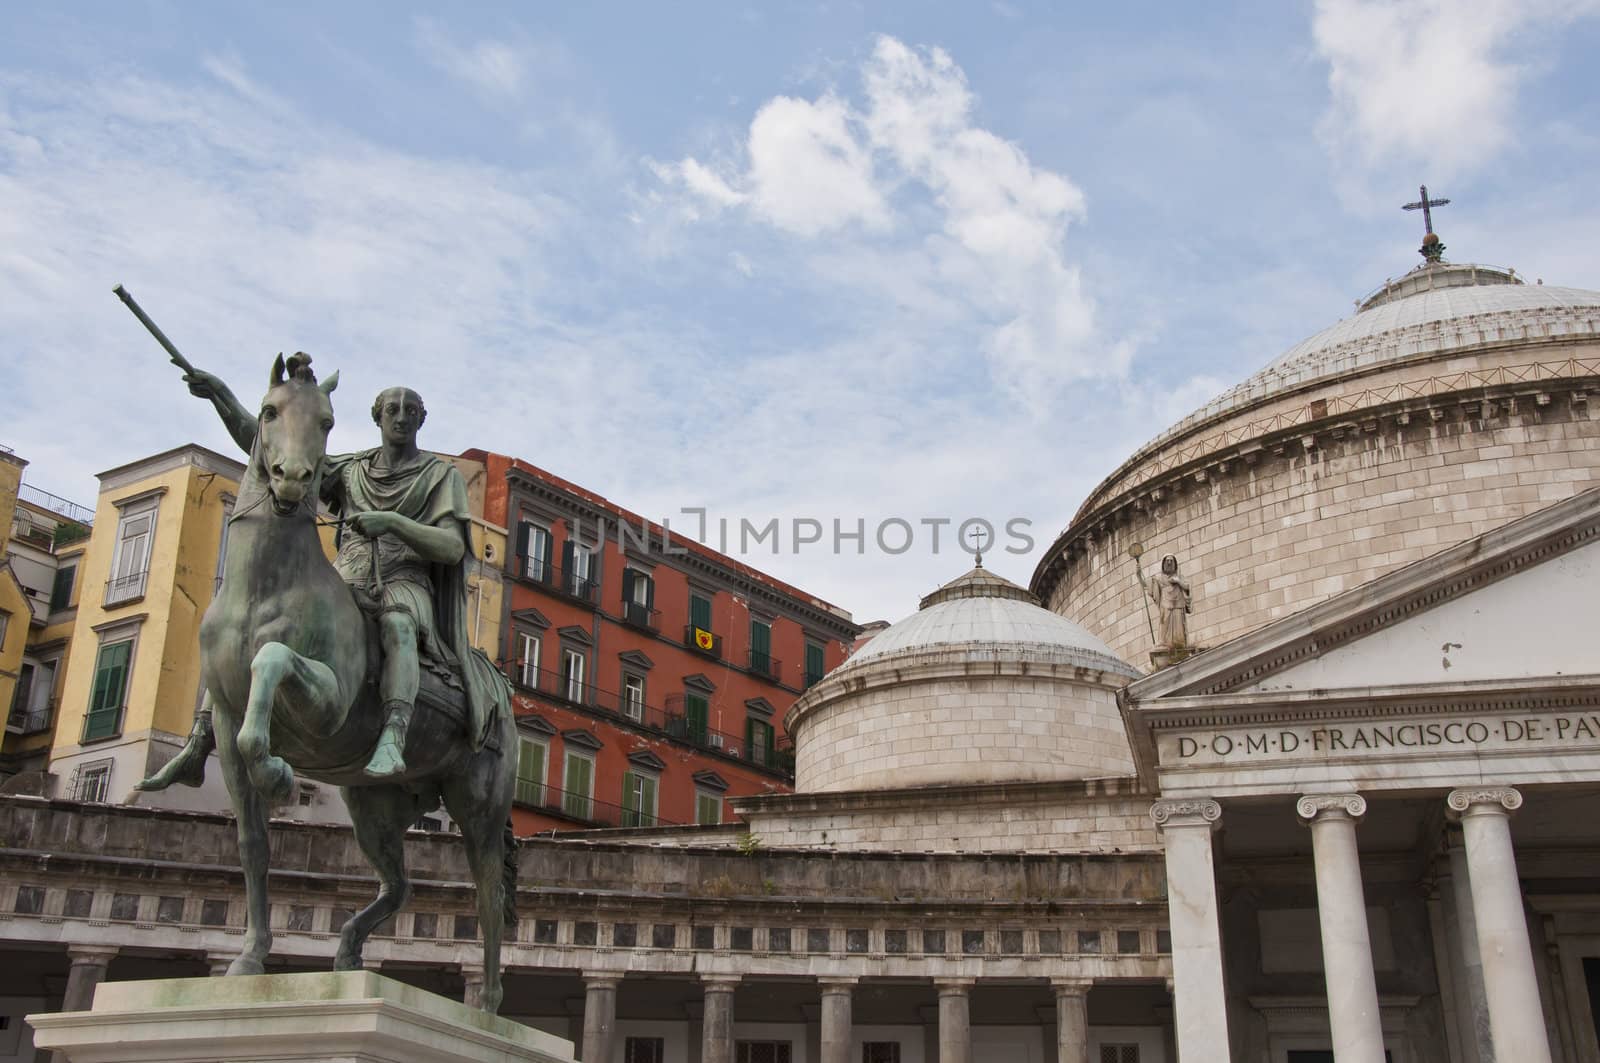 view and details of piazza plebiscito in naples, italy